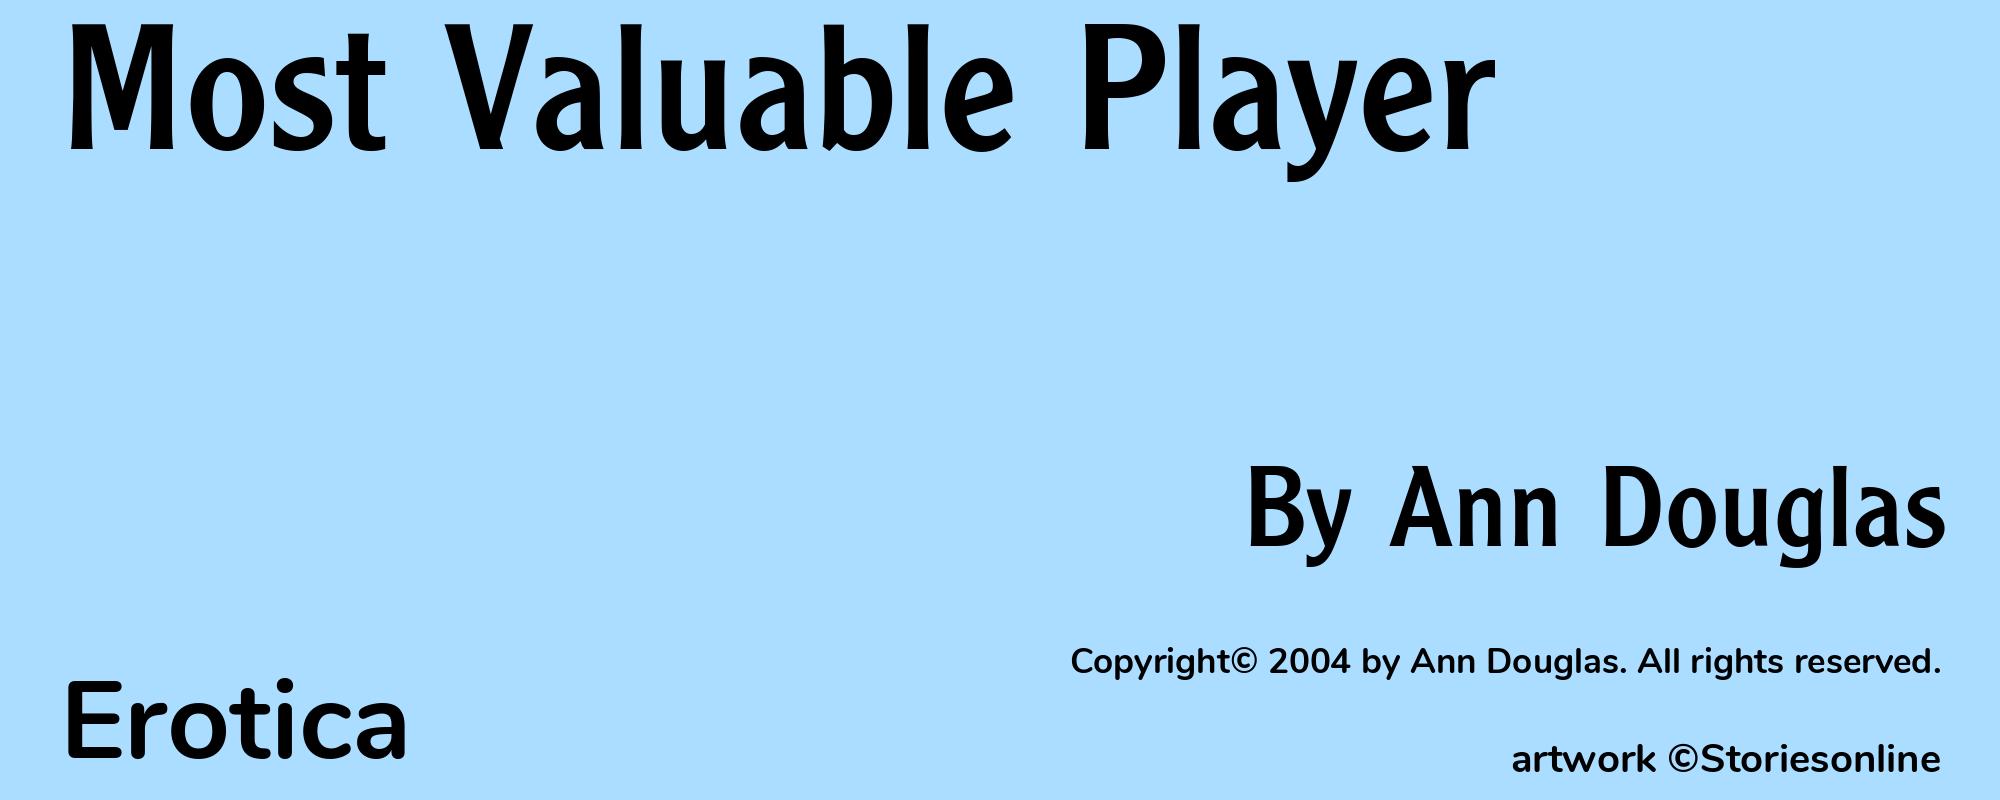 Most Valuable Player - Cover